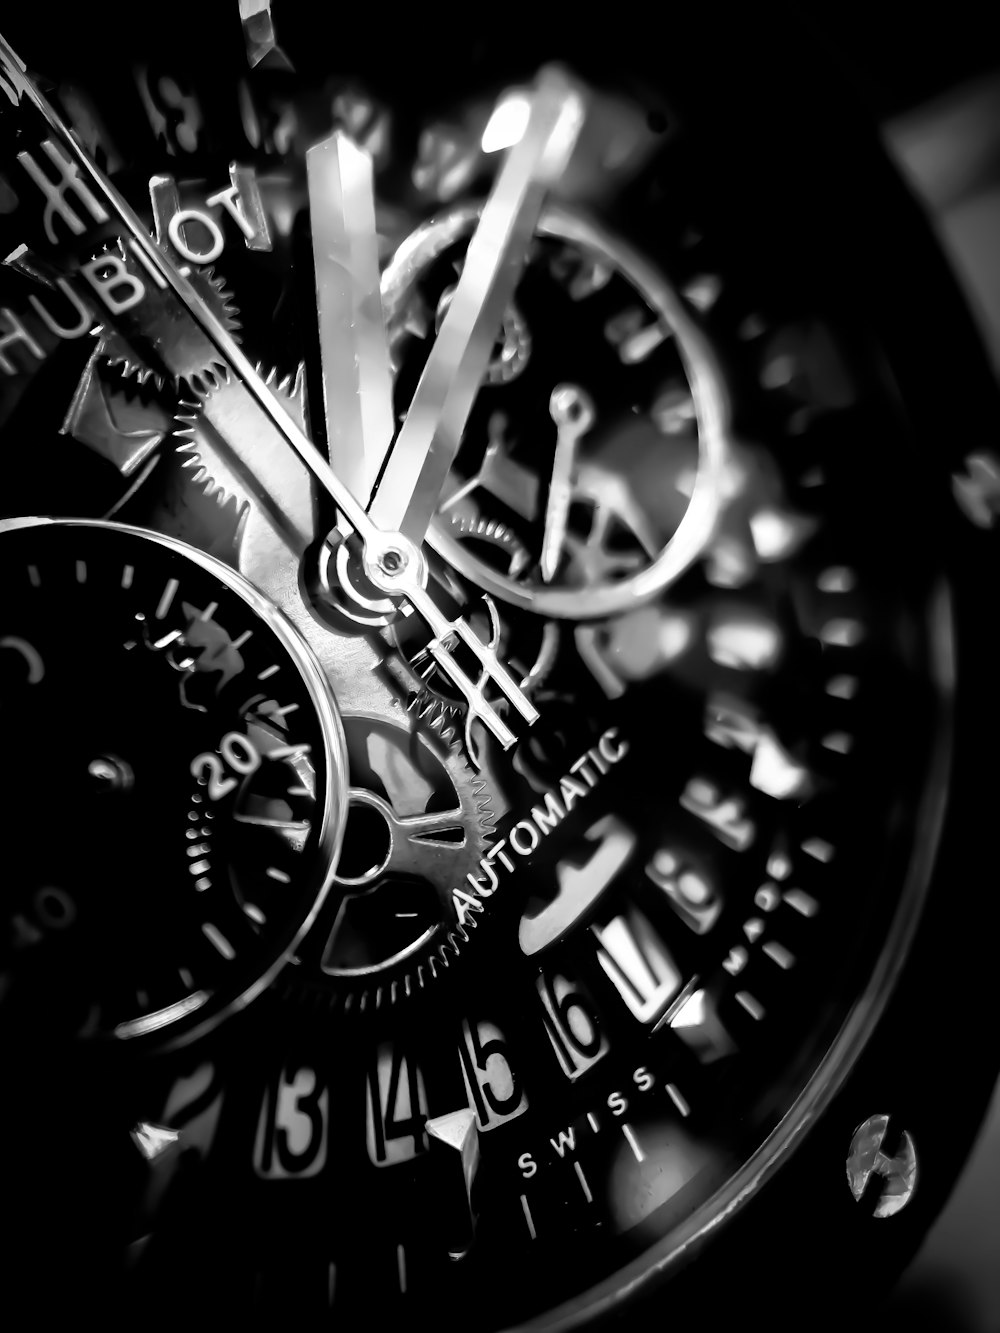 grayscale photo of Hublot chronograph watch displaying 01:10 time